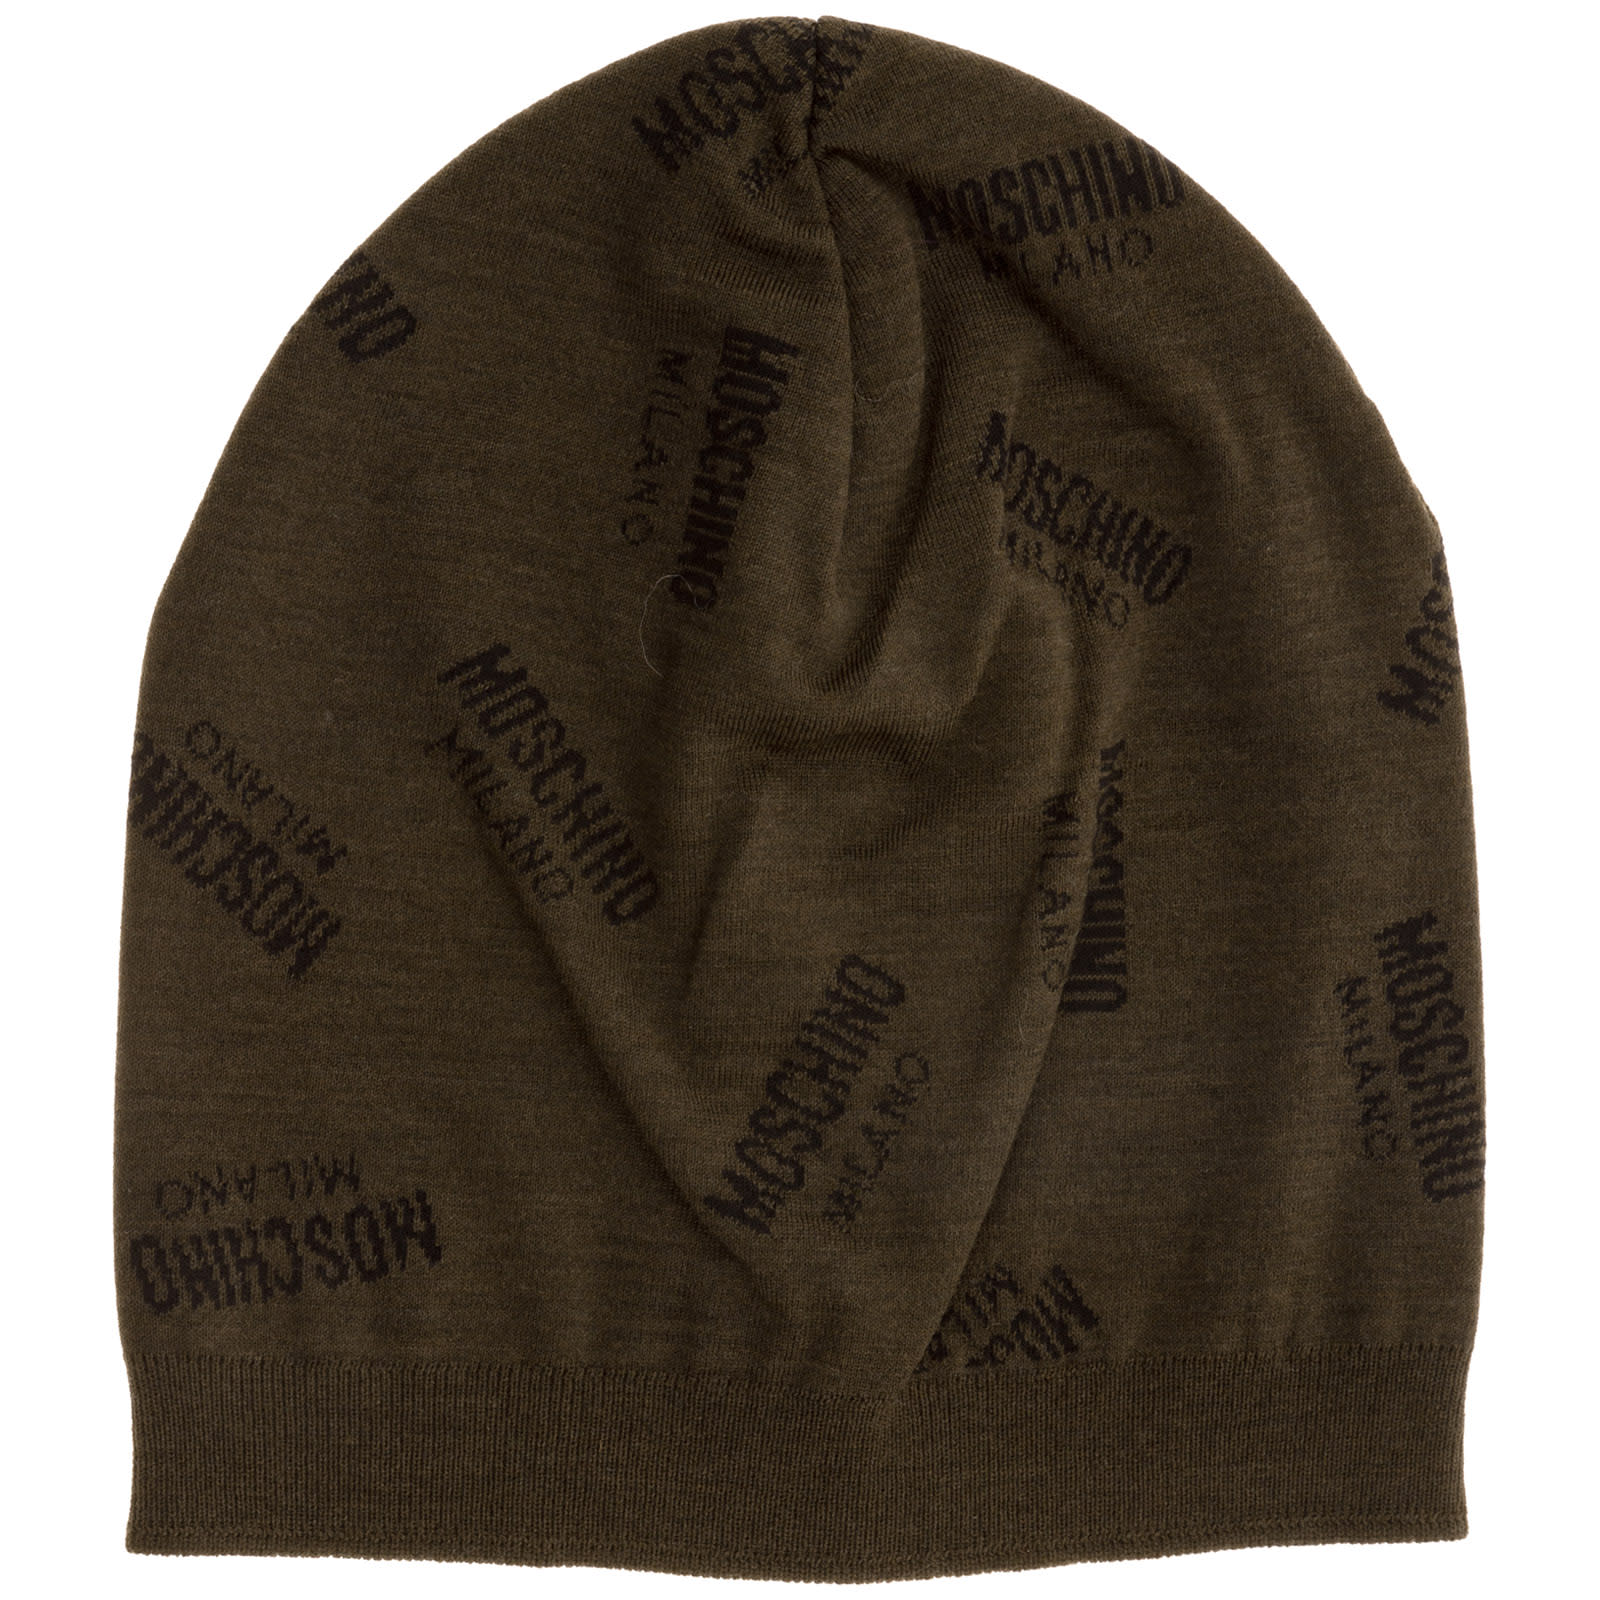 MOSCHINO DOUBLE QUESTION MARK BEANIE,M525060068006